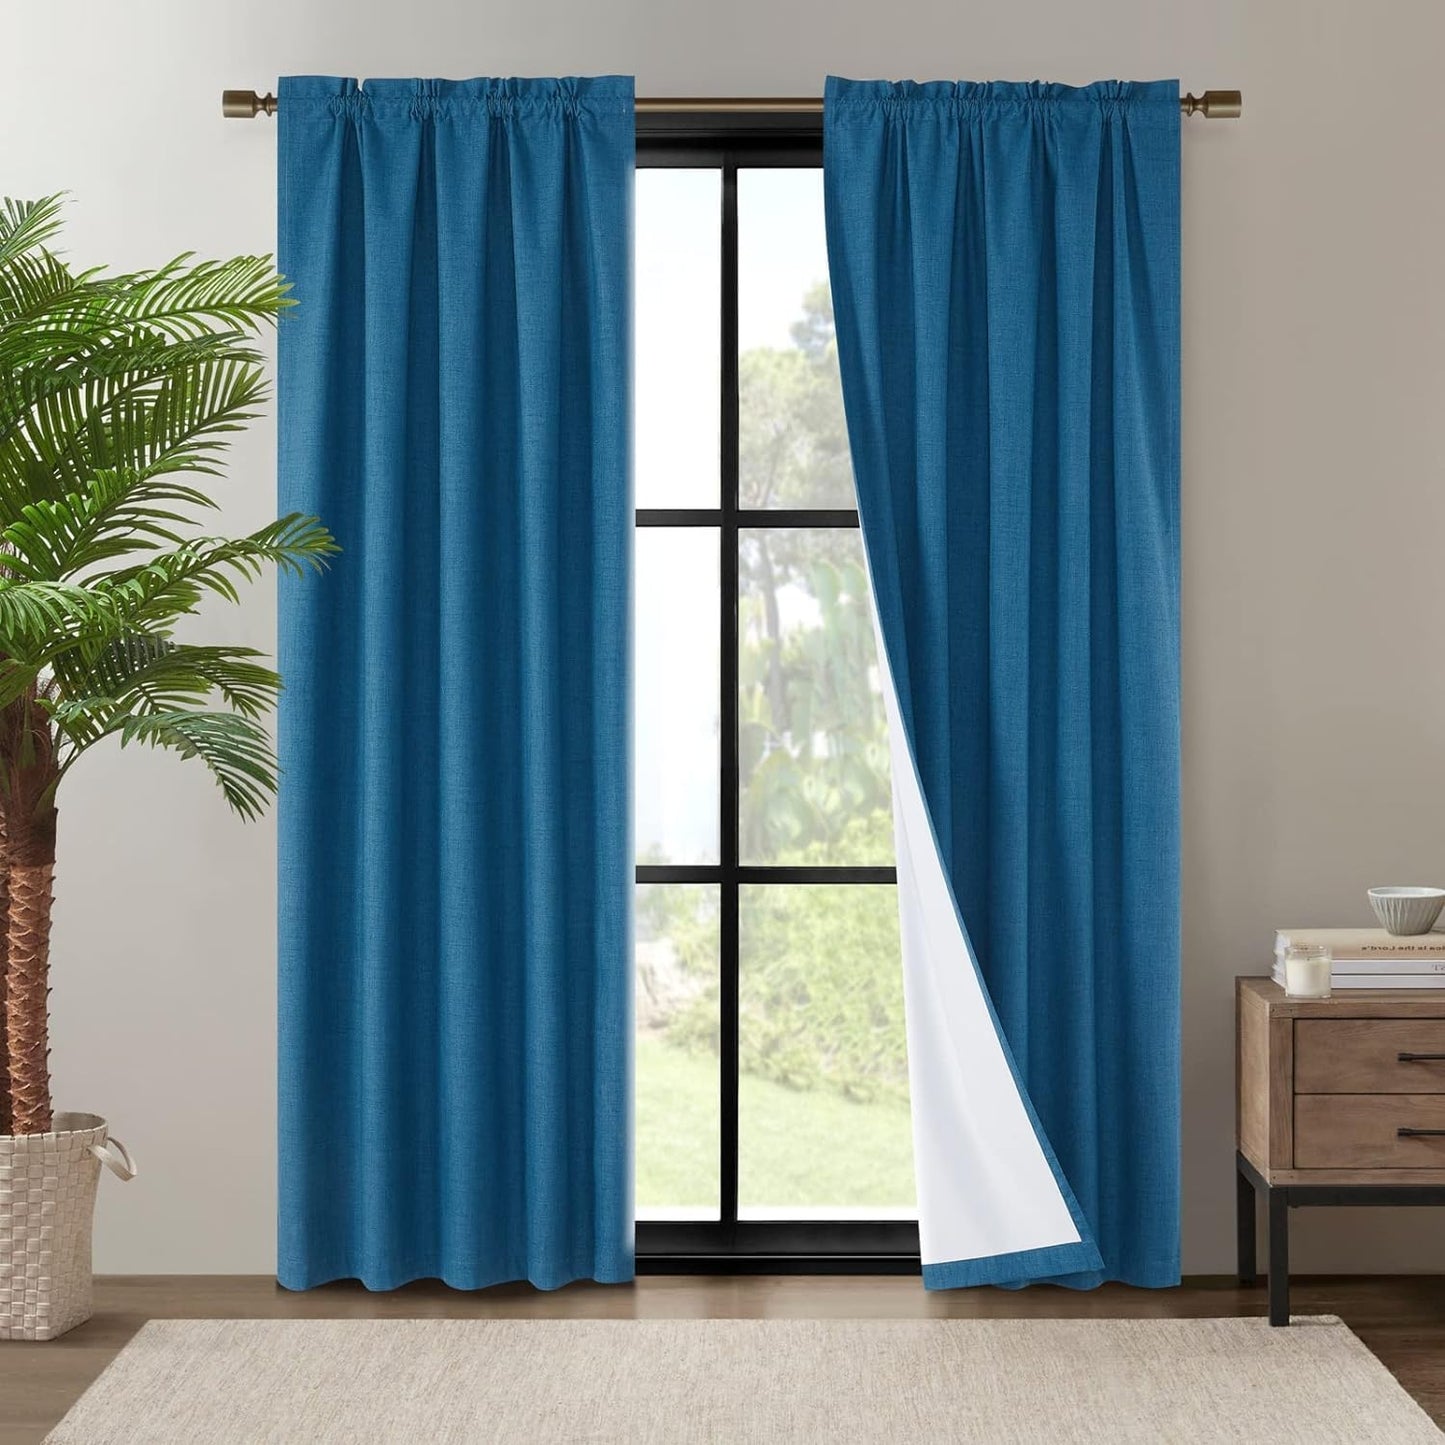 Dreaming Casa Linen Blackout Curtains for Beadroom 2 Panels 102 Inch Long Living Room Drapes Boho Rustic 100% Black Out White Window Curtain with Rod Pocket, 52" W X 102" L  Dreaming Casa Blue, Rod Pocket 2 X (100"W X 102"L) 